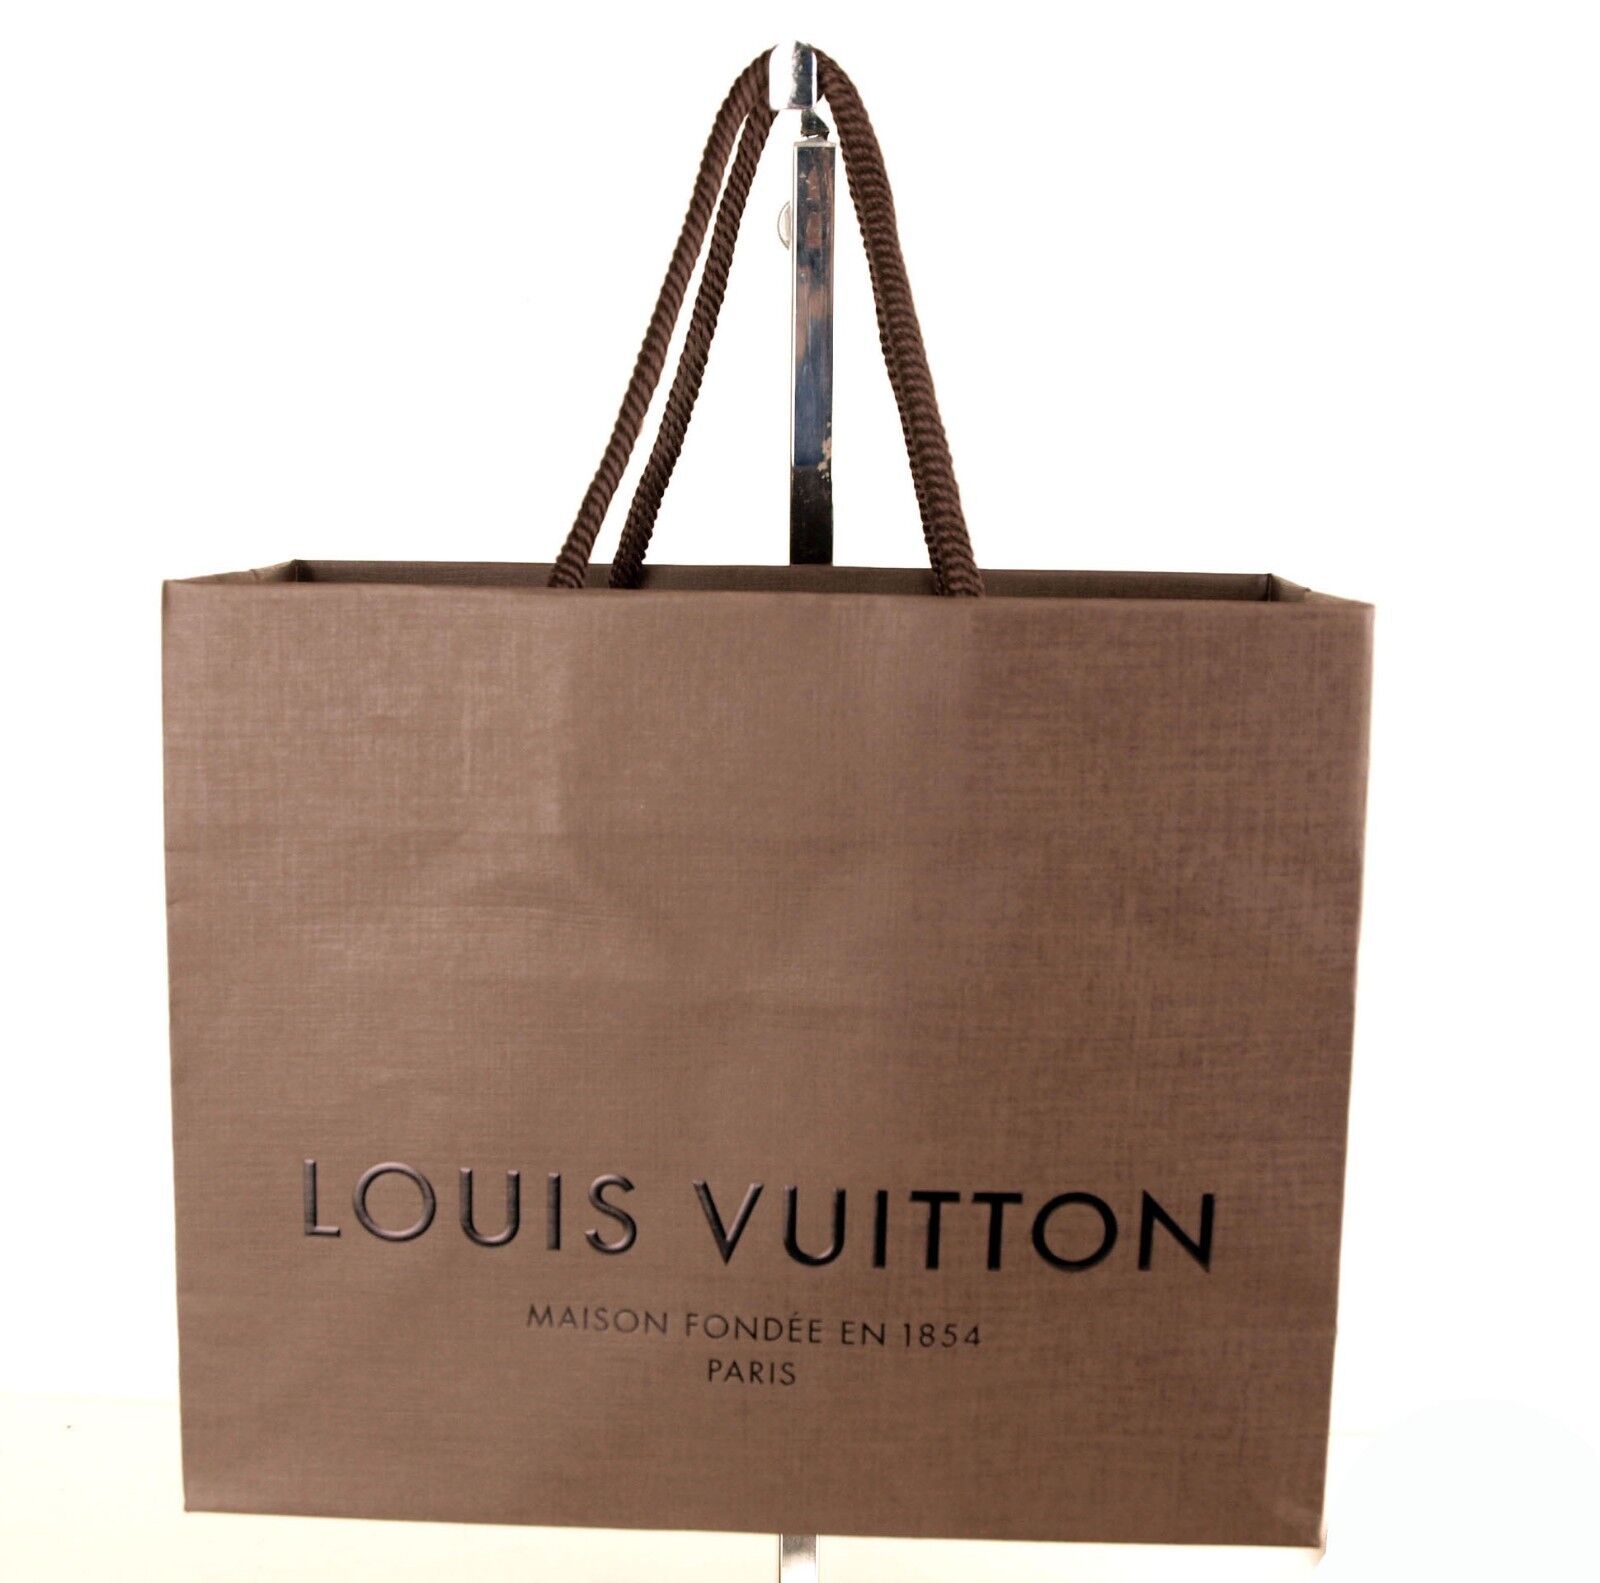 Louis Vuitton 5 pc Set Brown Paper Bag Store Bag Present Wrapping Bag Unused